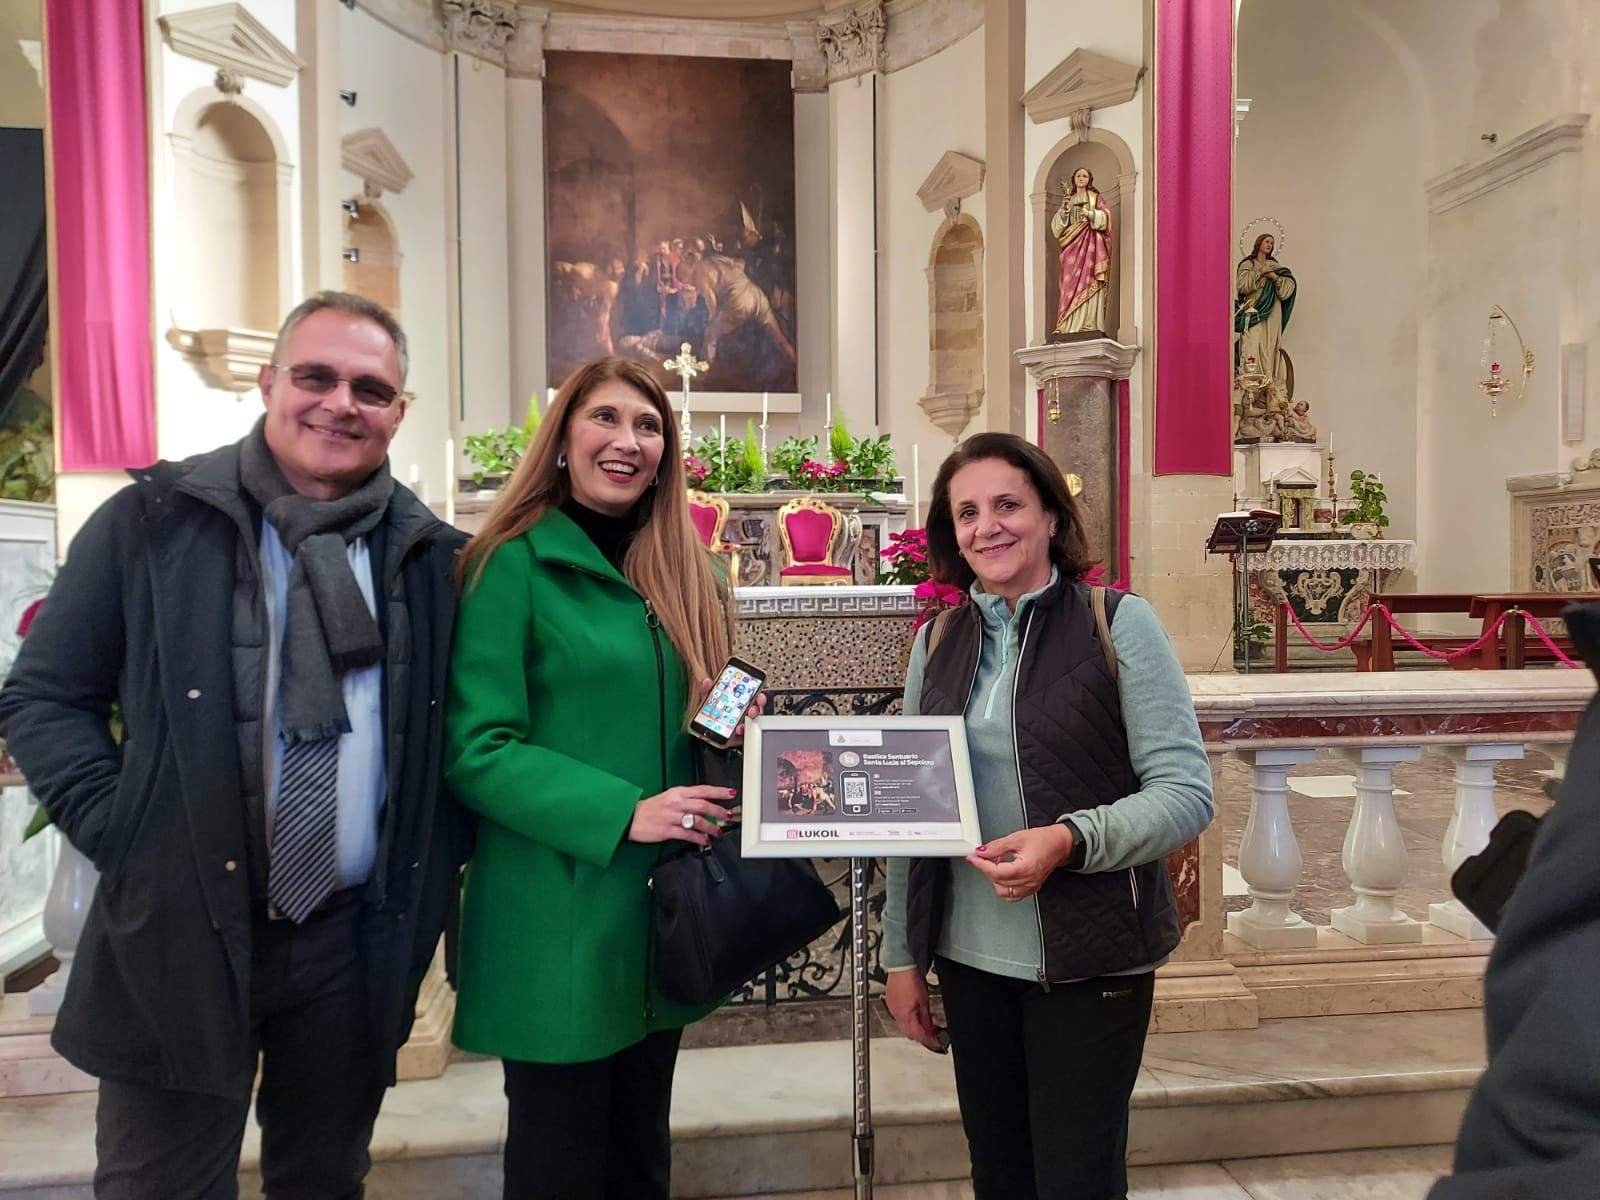 Syracuse, basilica with Caravaggio's St. Lucy gets Interactive Signage